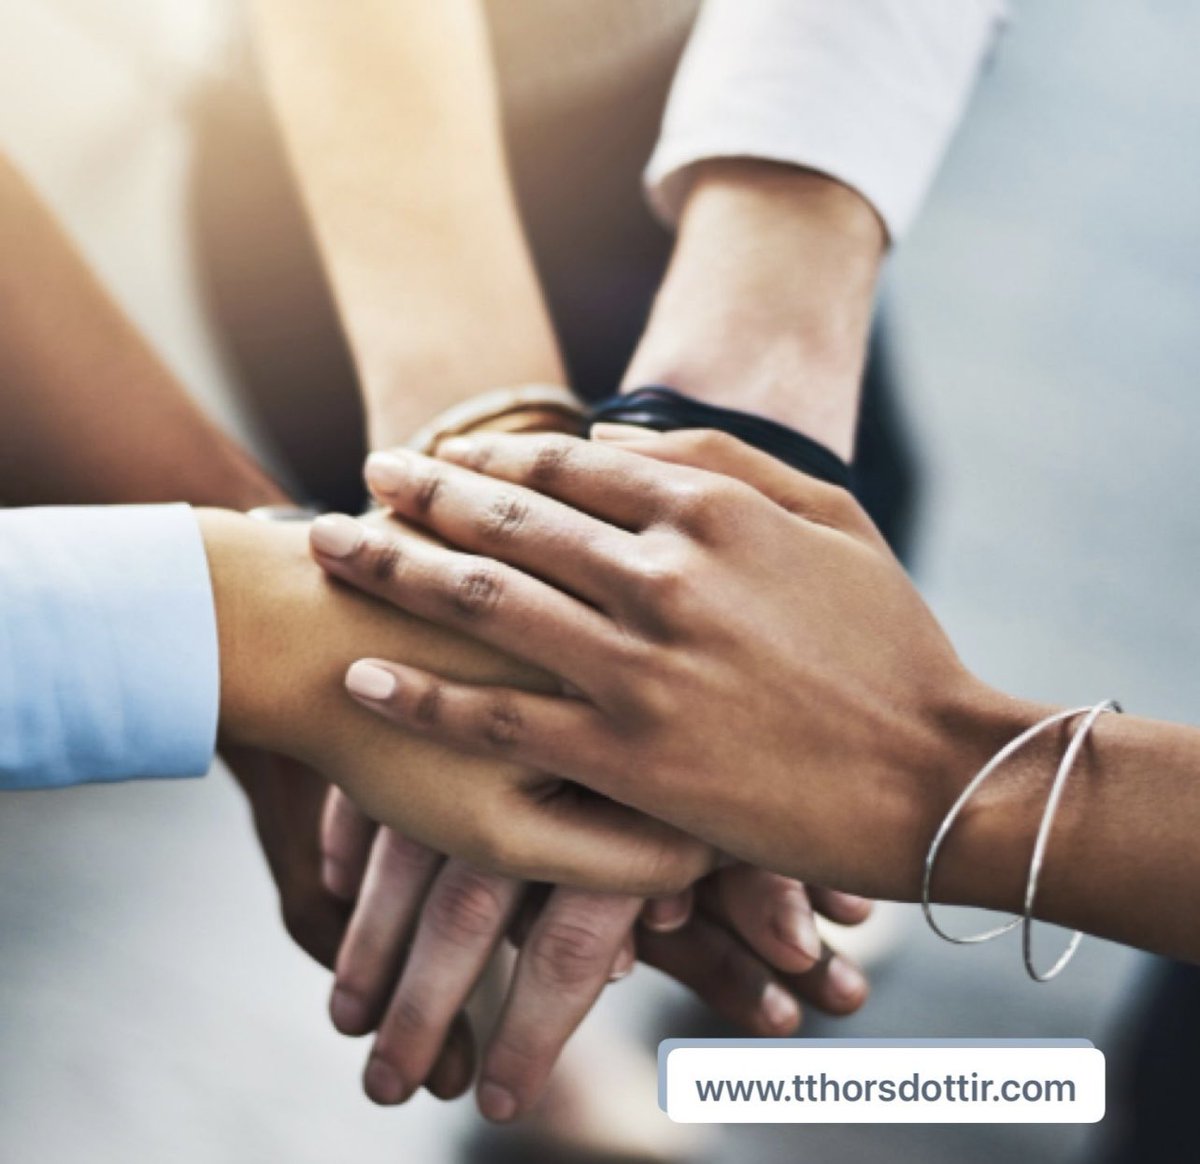 We work with companies going through mergers and acquisitions, helping teams at all levels reach their goals post-merger. 

This can be useful, especially where unforeseen resistance occurs which can hinder merger success. 

#mergers #acquisitions #teameffectiveness #teamdynamics